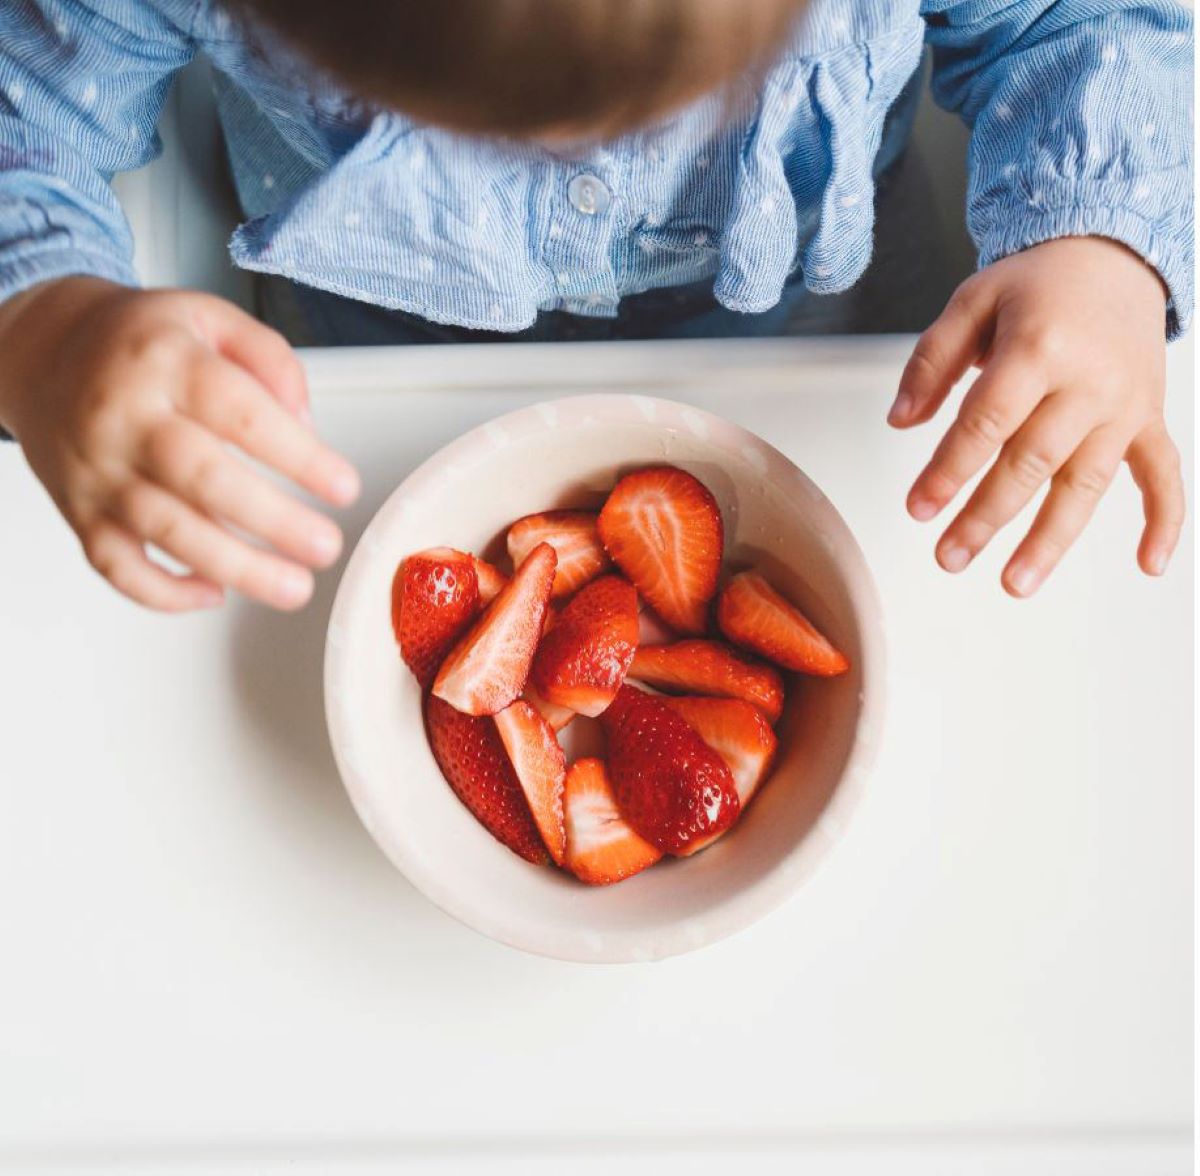 how-to-cut-strawberries-for-18-month-old